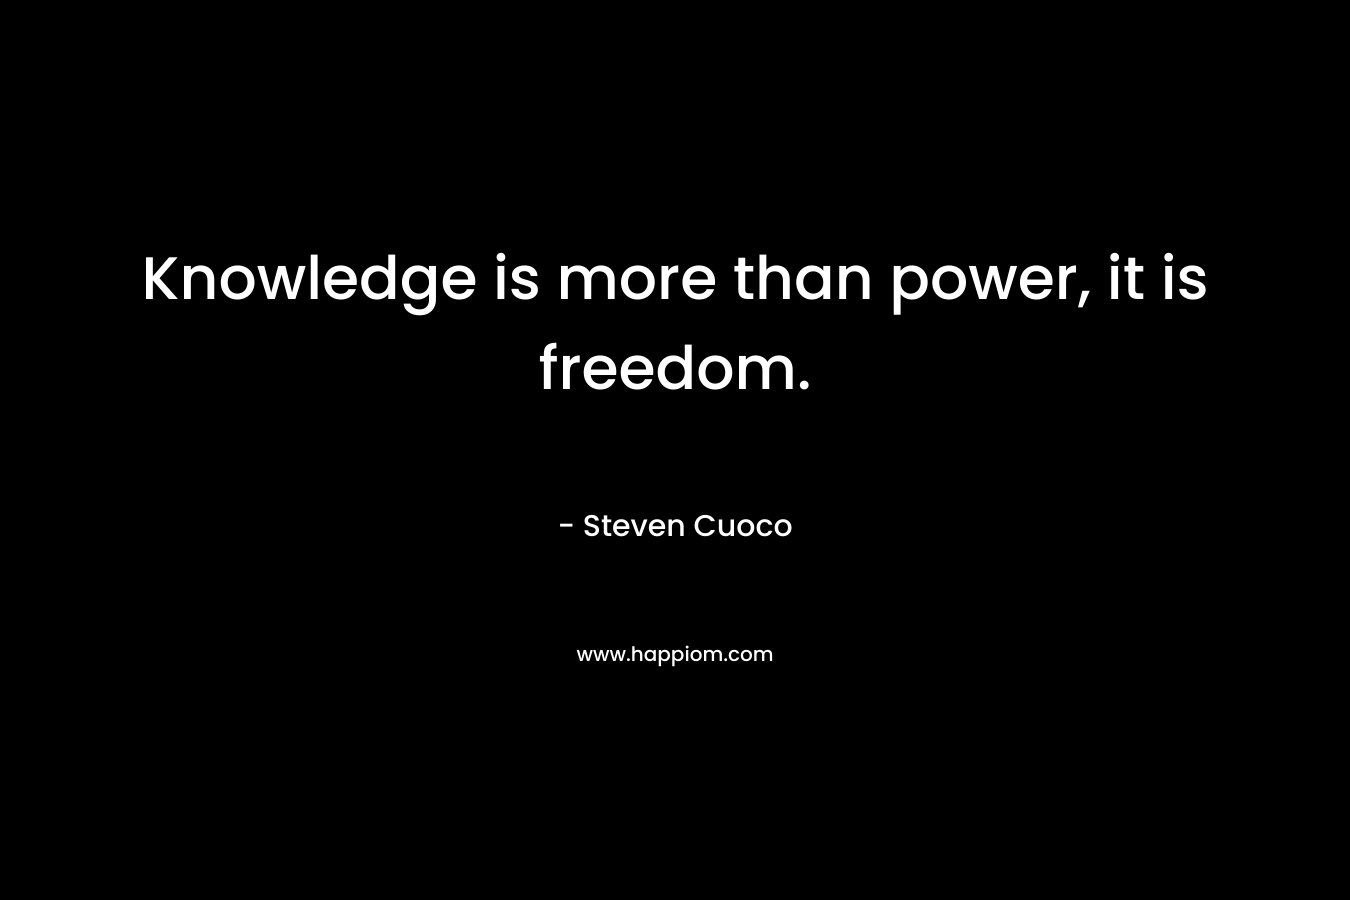 Knowledge is more than power, it is freedom. – Steven Cuoco